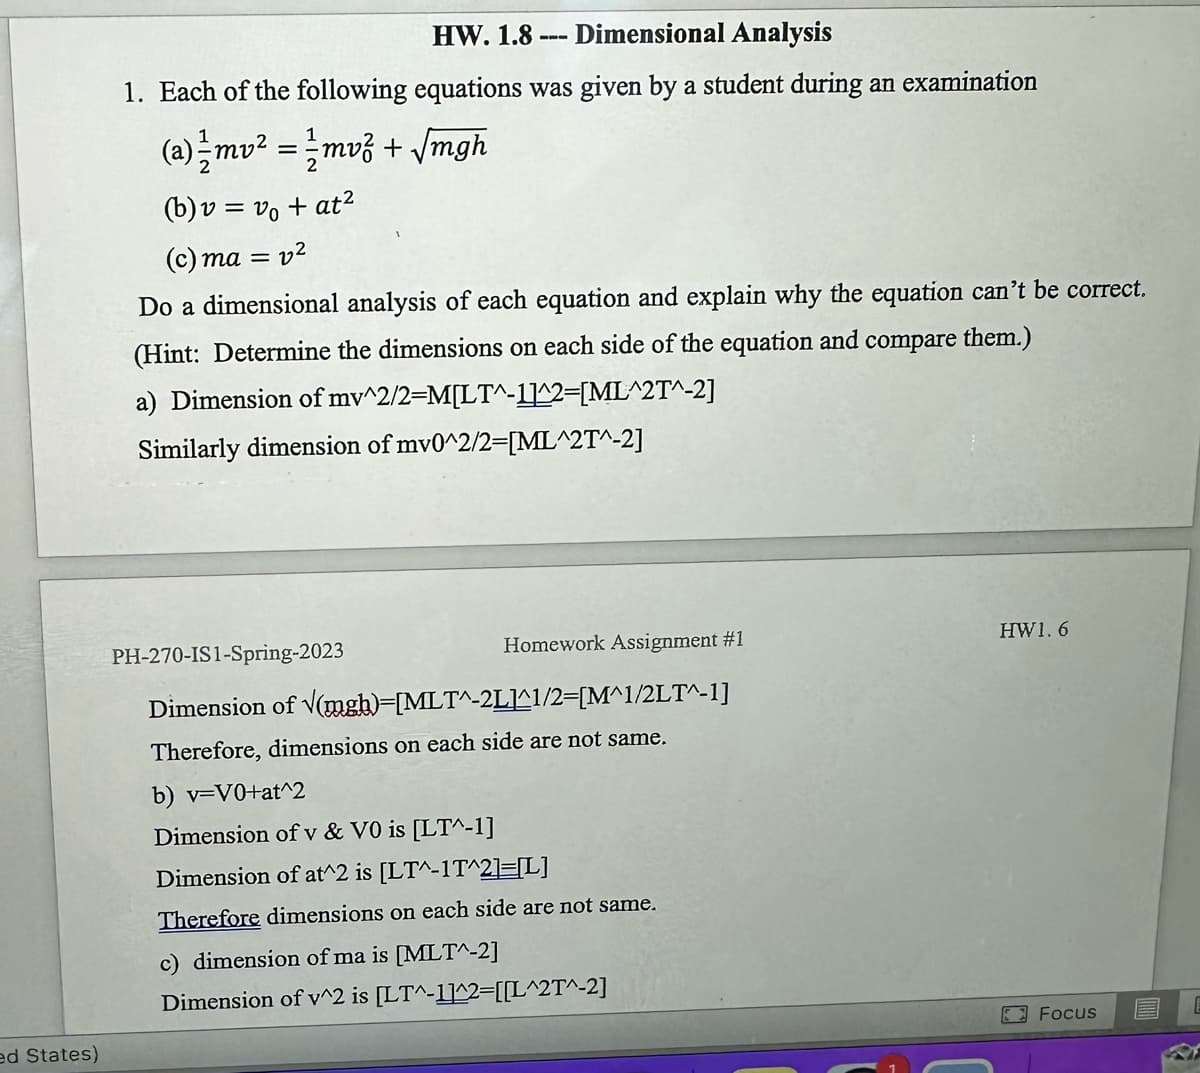 ed States)
HW. 1.8
Dimensional Analysis
1. Each of the following equations was given by a student during an examination
(a) 1/2mv² = 1/2mv² + √mgh
(b) v = v₁ + at²
(c) ma = 22
Do a dimensional analysis of each equation and explain why the equation can't be correct.
(Hint: Determine the dimensions on each side of the equation and compare them.)
a) Dimension of mv^2/2=M[LT^-1]^2=[ML^2T^-2]
Similarly dimension of mv0^2/2=[ML^2T^-2]
Homework Assignment #1
PH-270-IS1-Spring-2023
Dimension of √(mgh)=[MLT^-2L1^1/2=[M^1/2LT^-1]
Therefore, dimensions on each side are not same.
b) v=v0+at^2
Dimension of v & VO is [LT^-1]
Dimension of at^2 is [LT^-1T^2]=[L]
Therefore dimensions on each side are not same.
c) dimension of ma is [MLT^-2]
Dimension of v^2 is [LT^-1]^2=[[L^2T^-2]
HW1.6
Focus